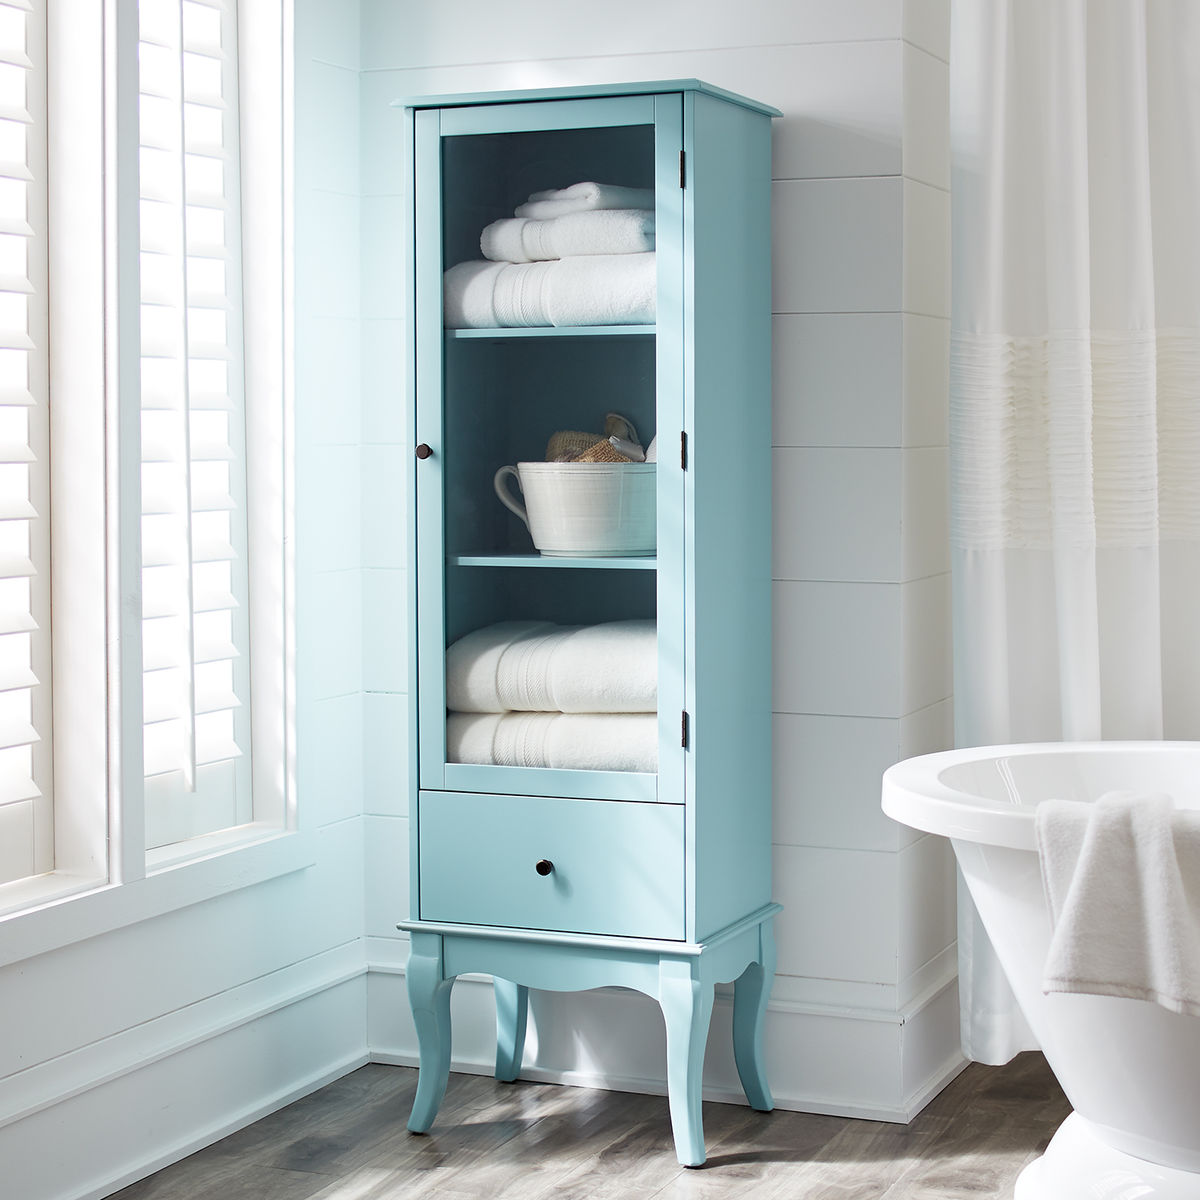 sky blue cabinets